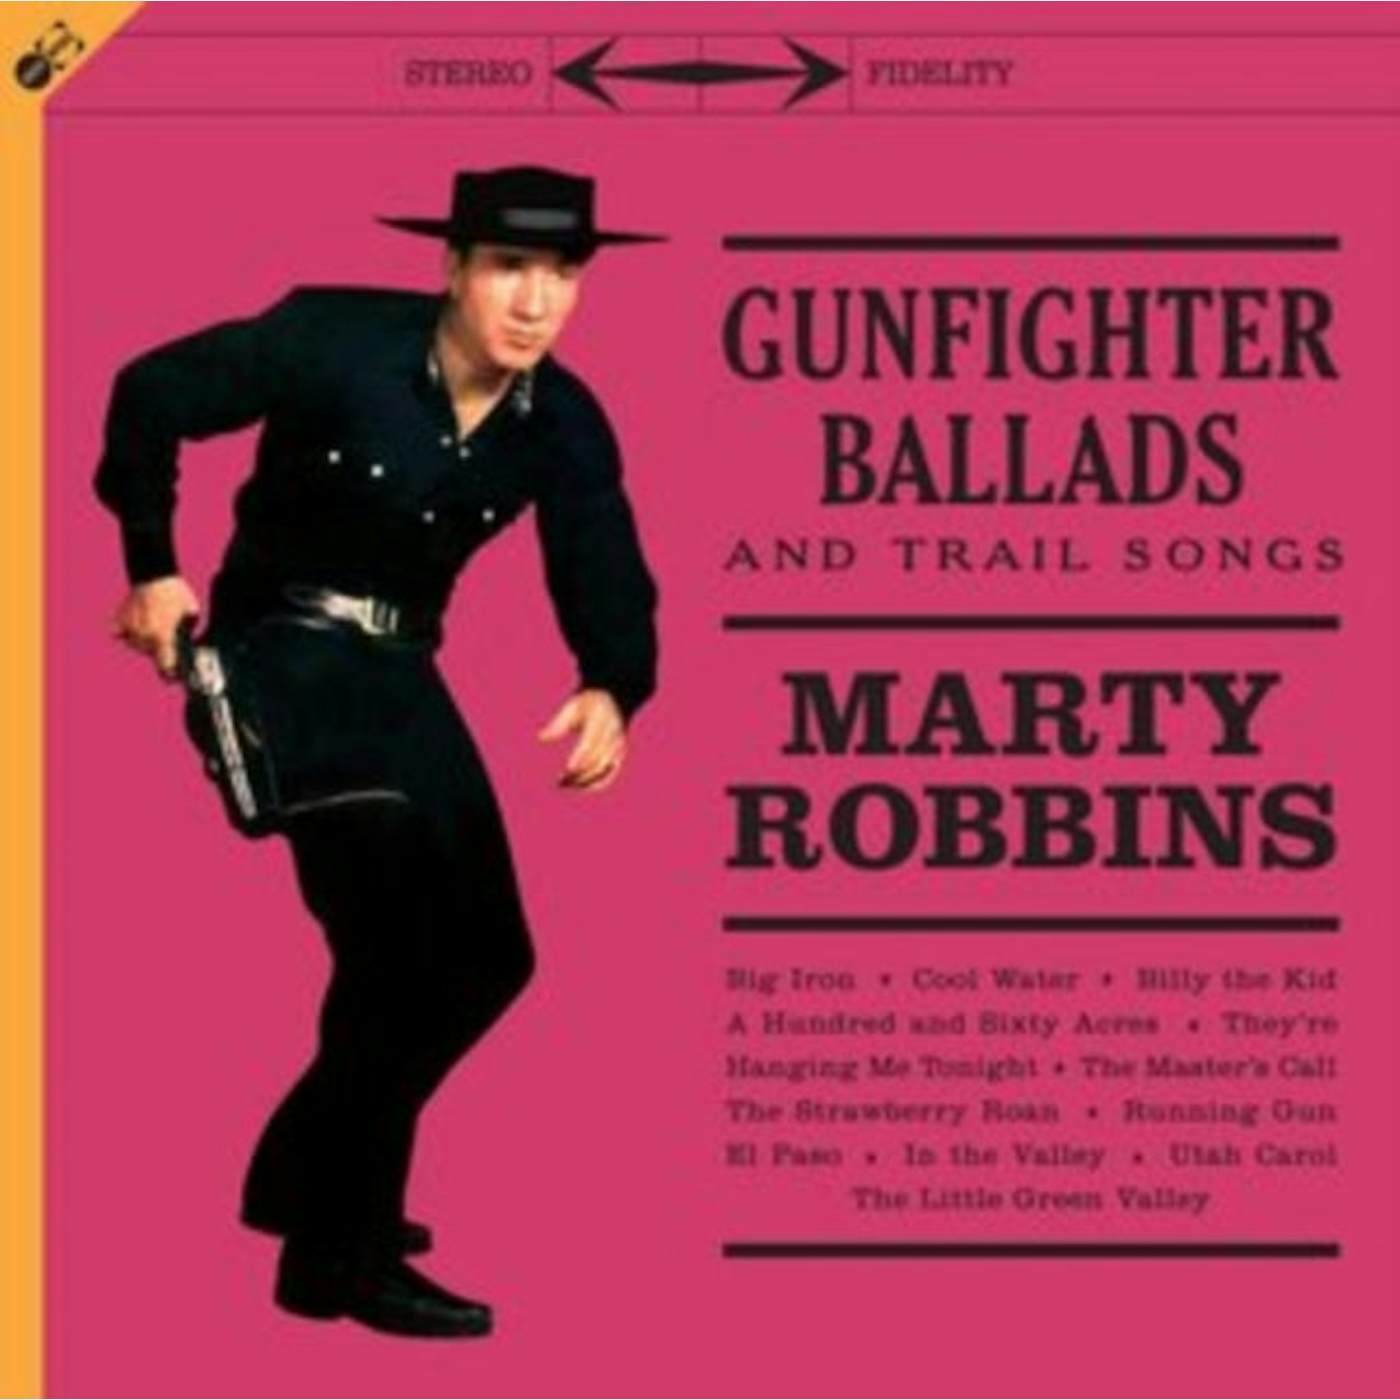 Marty Robbins LP Vinyl Record - Gunfighter Ballads And Trail Songs CD